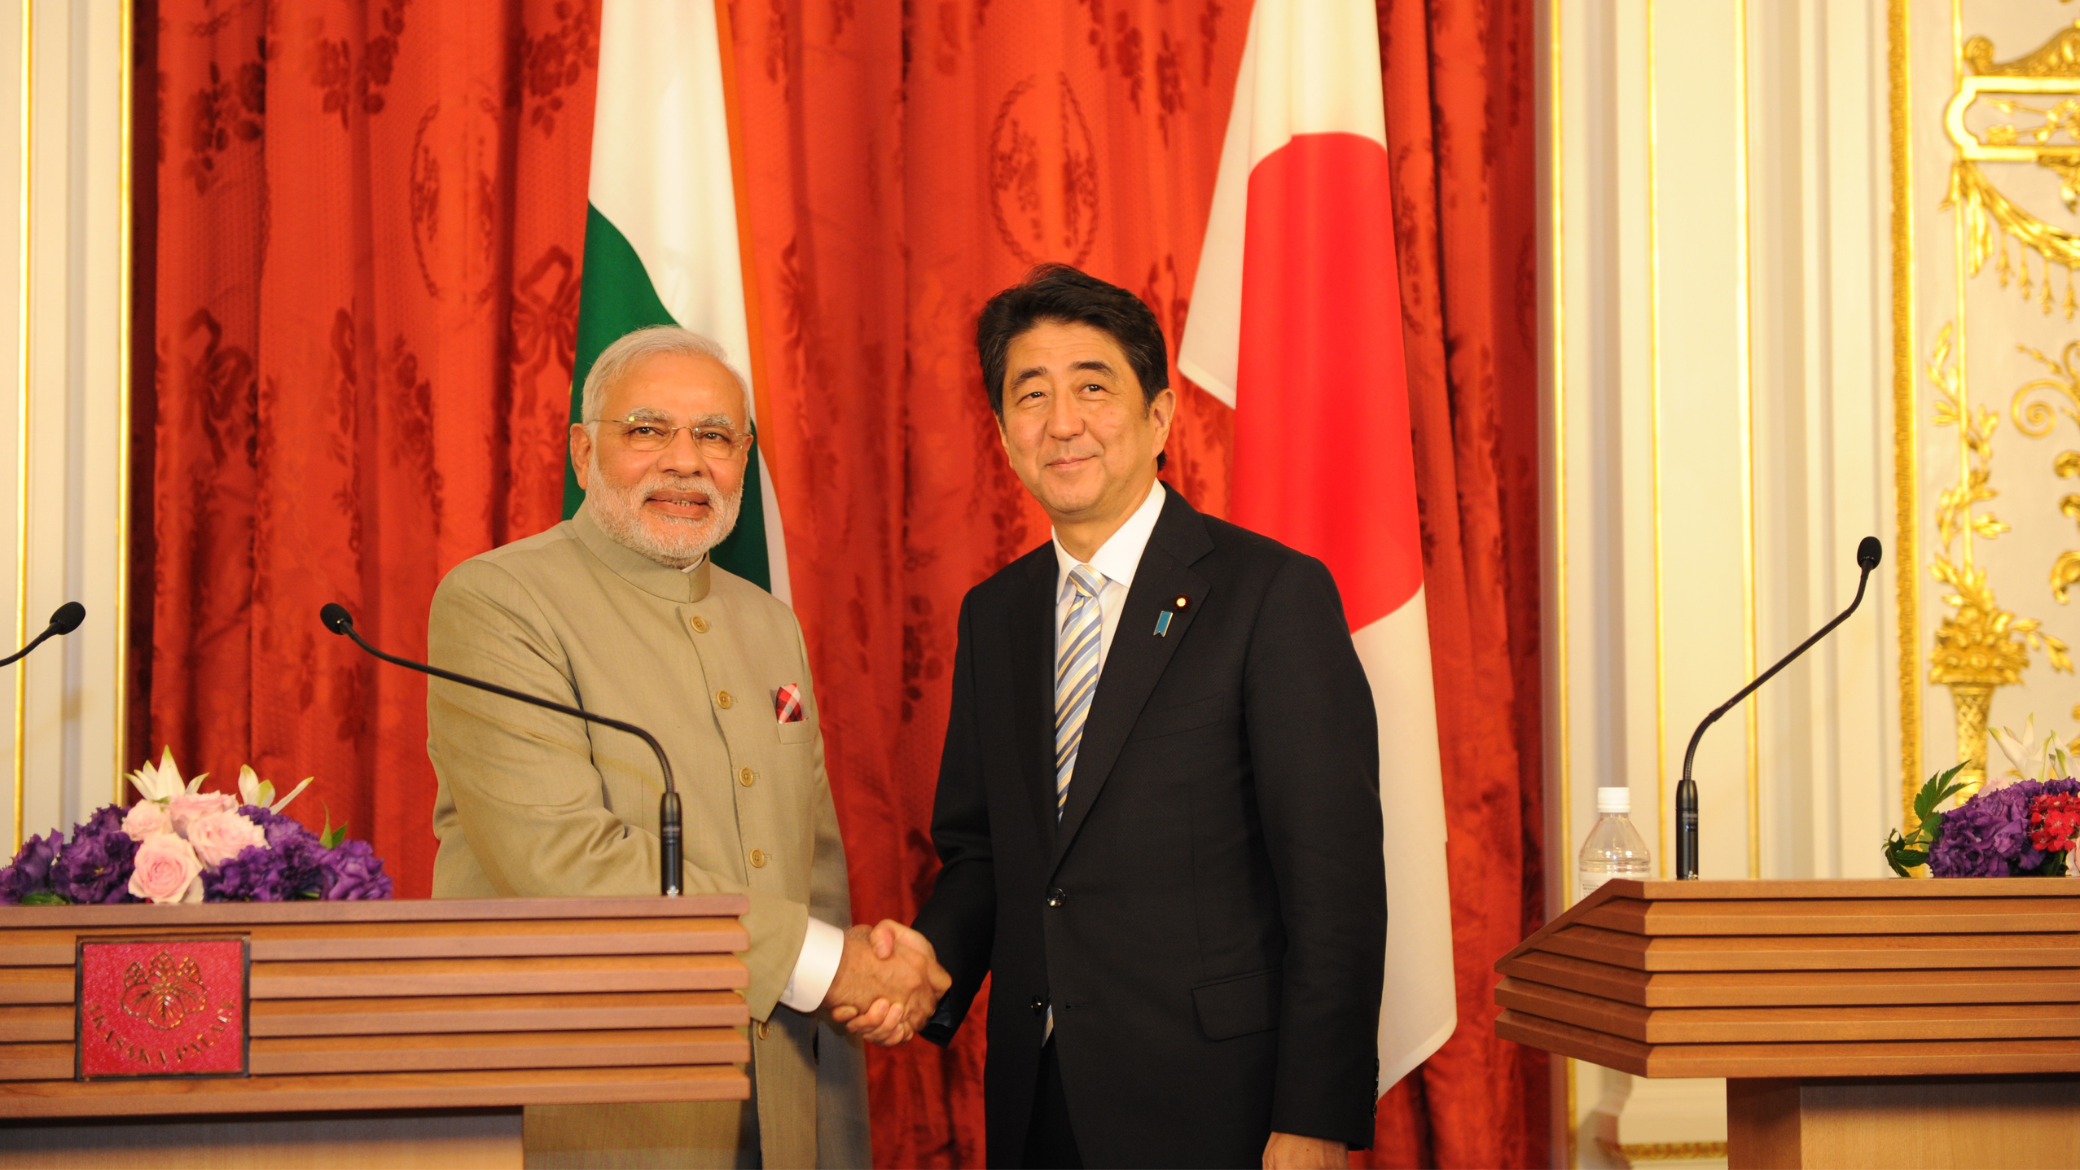 PacNet #43 – Post-Abe India-Japan ties: Does Kishida have what it takes?